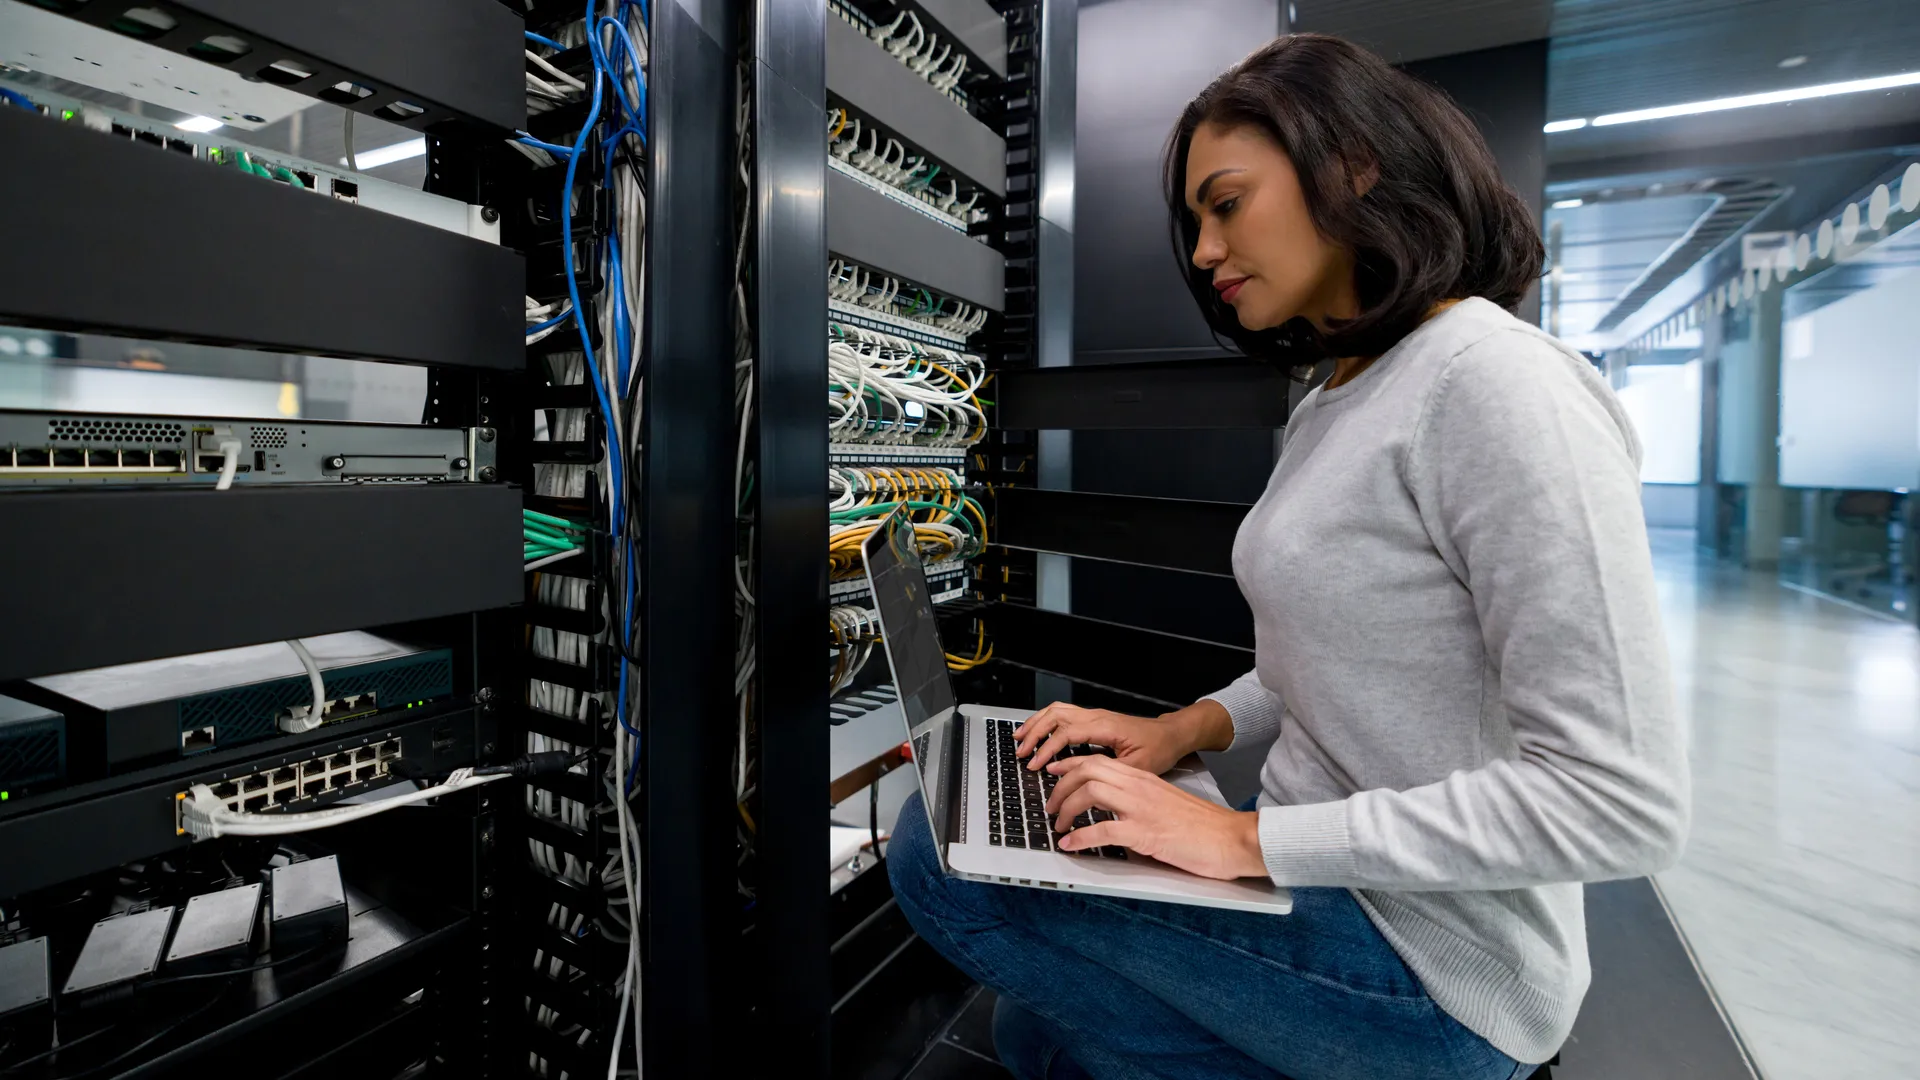 Female IT support technician fixing a network server at an office - technology concepts.